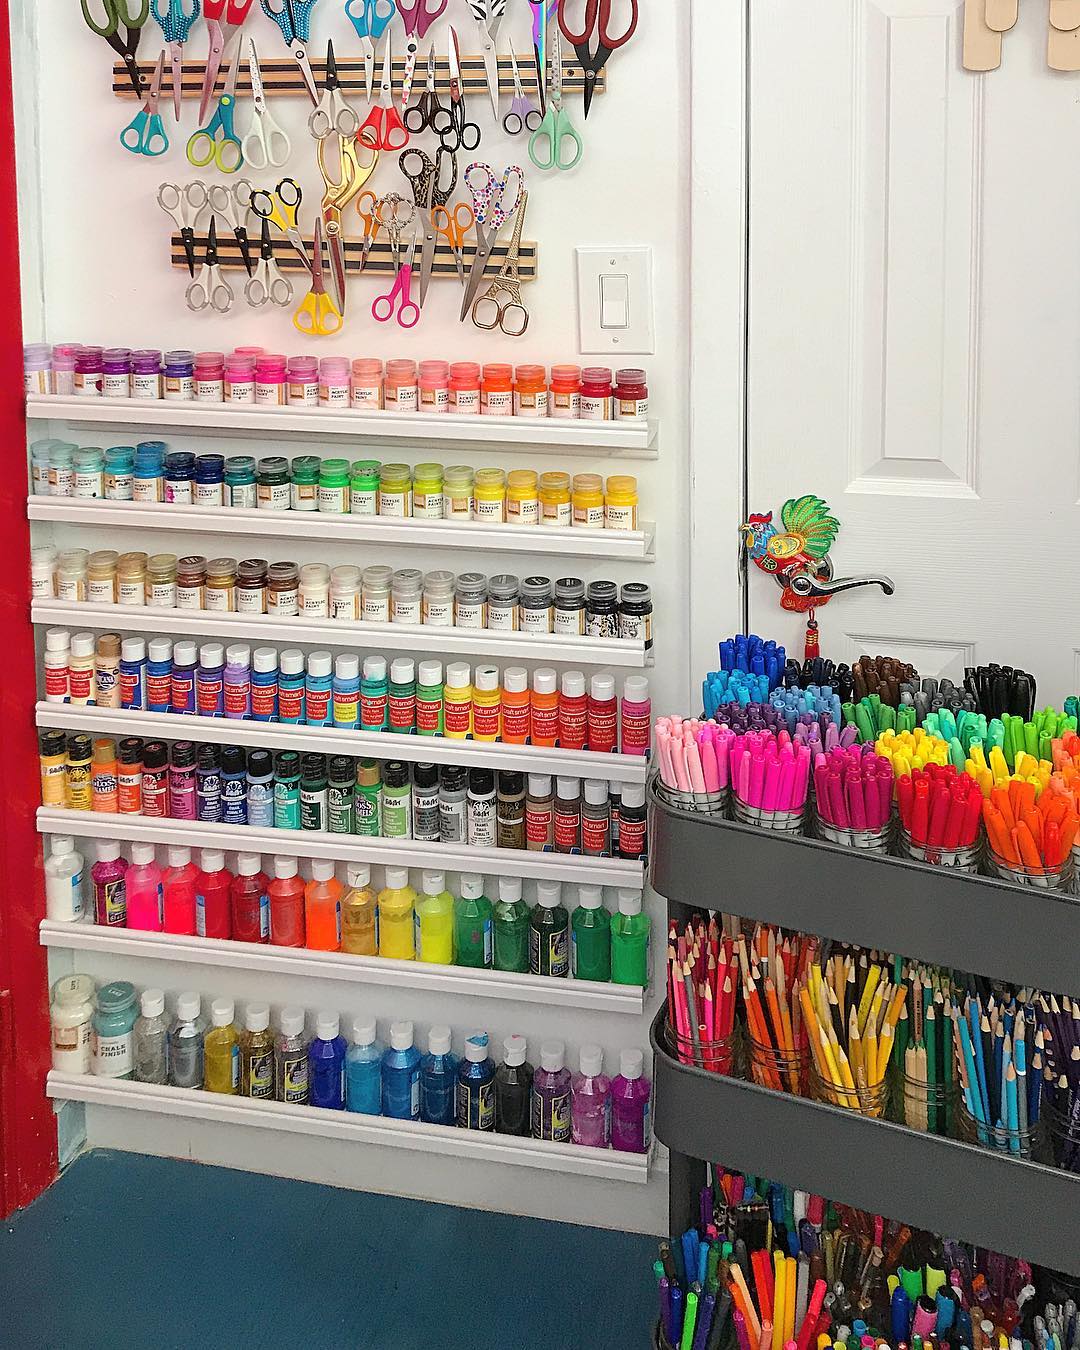 Craft room with color organization. Photo by Instagram user @cindyology